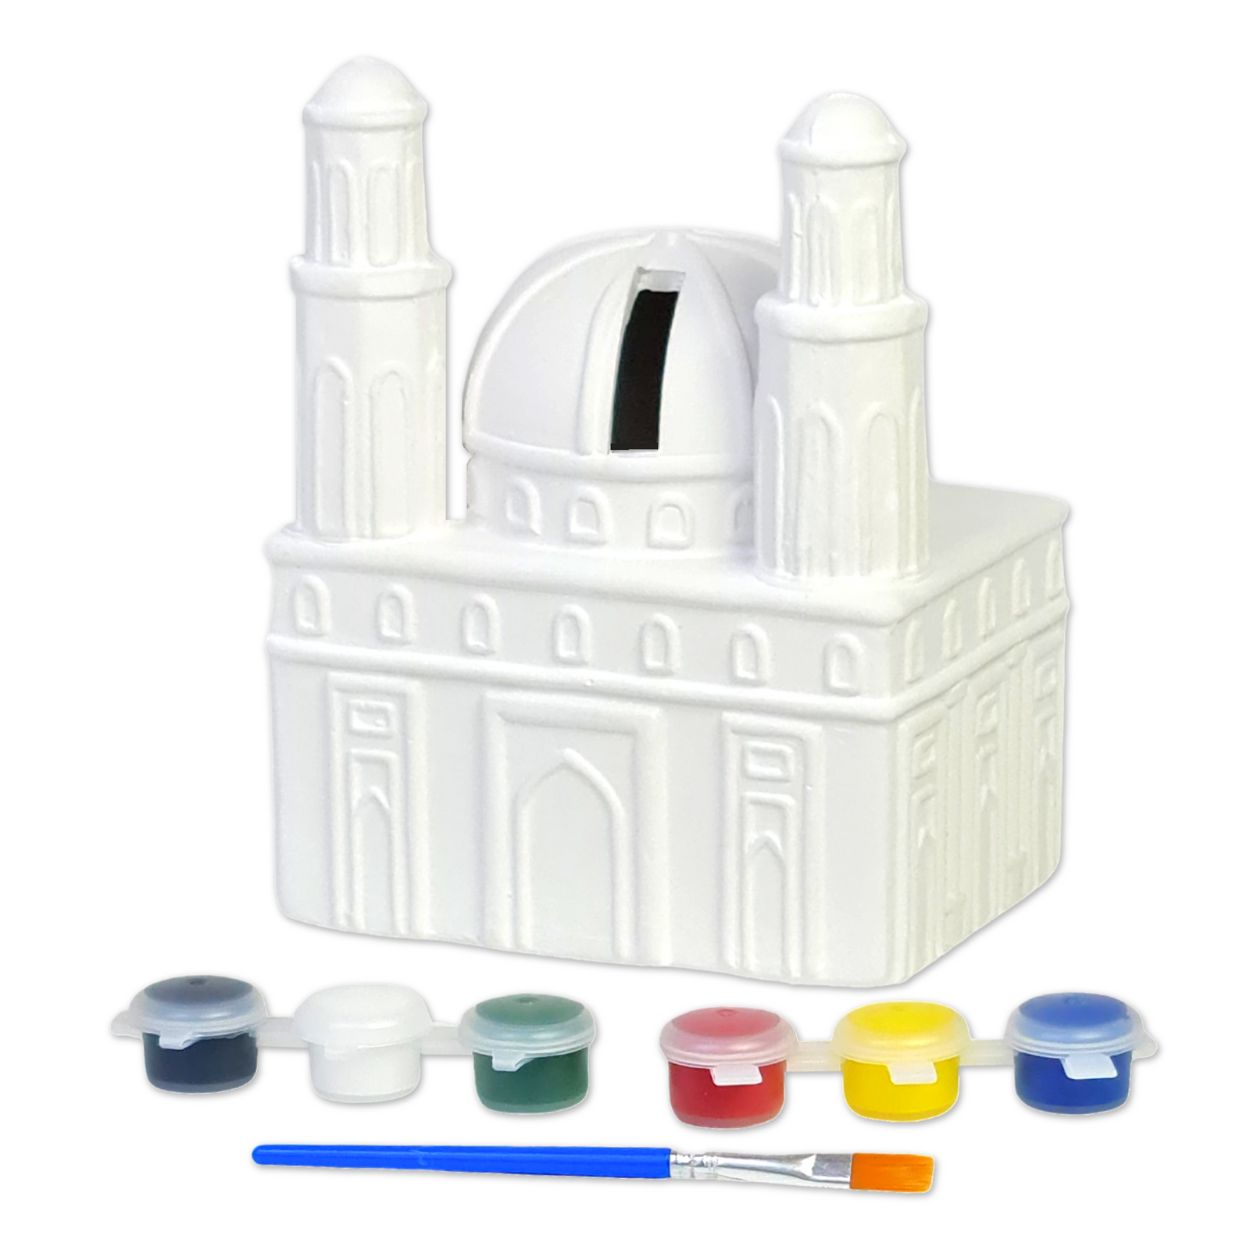 Ceramic Mosque Coin Bank for Kids - Encourage Charity & Creativity